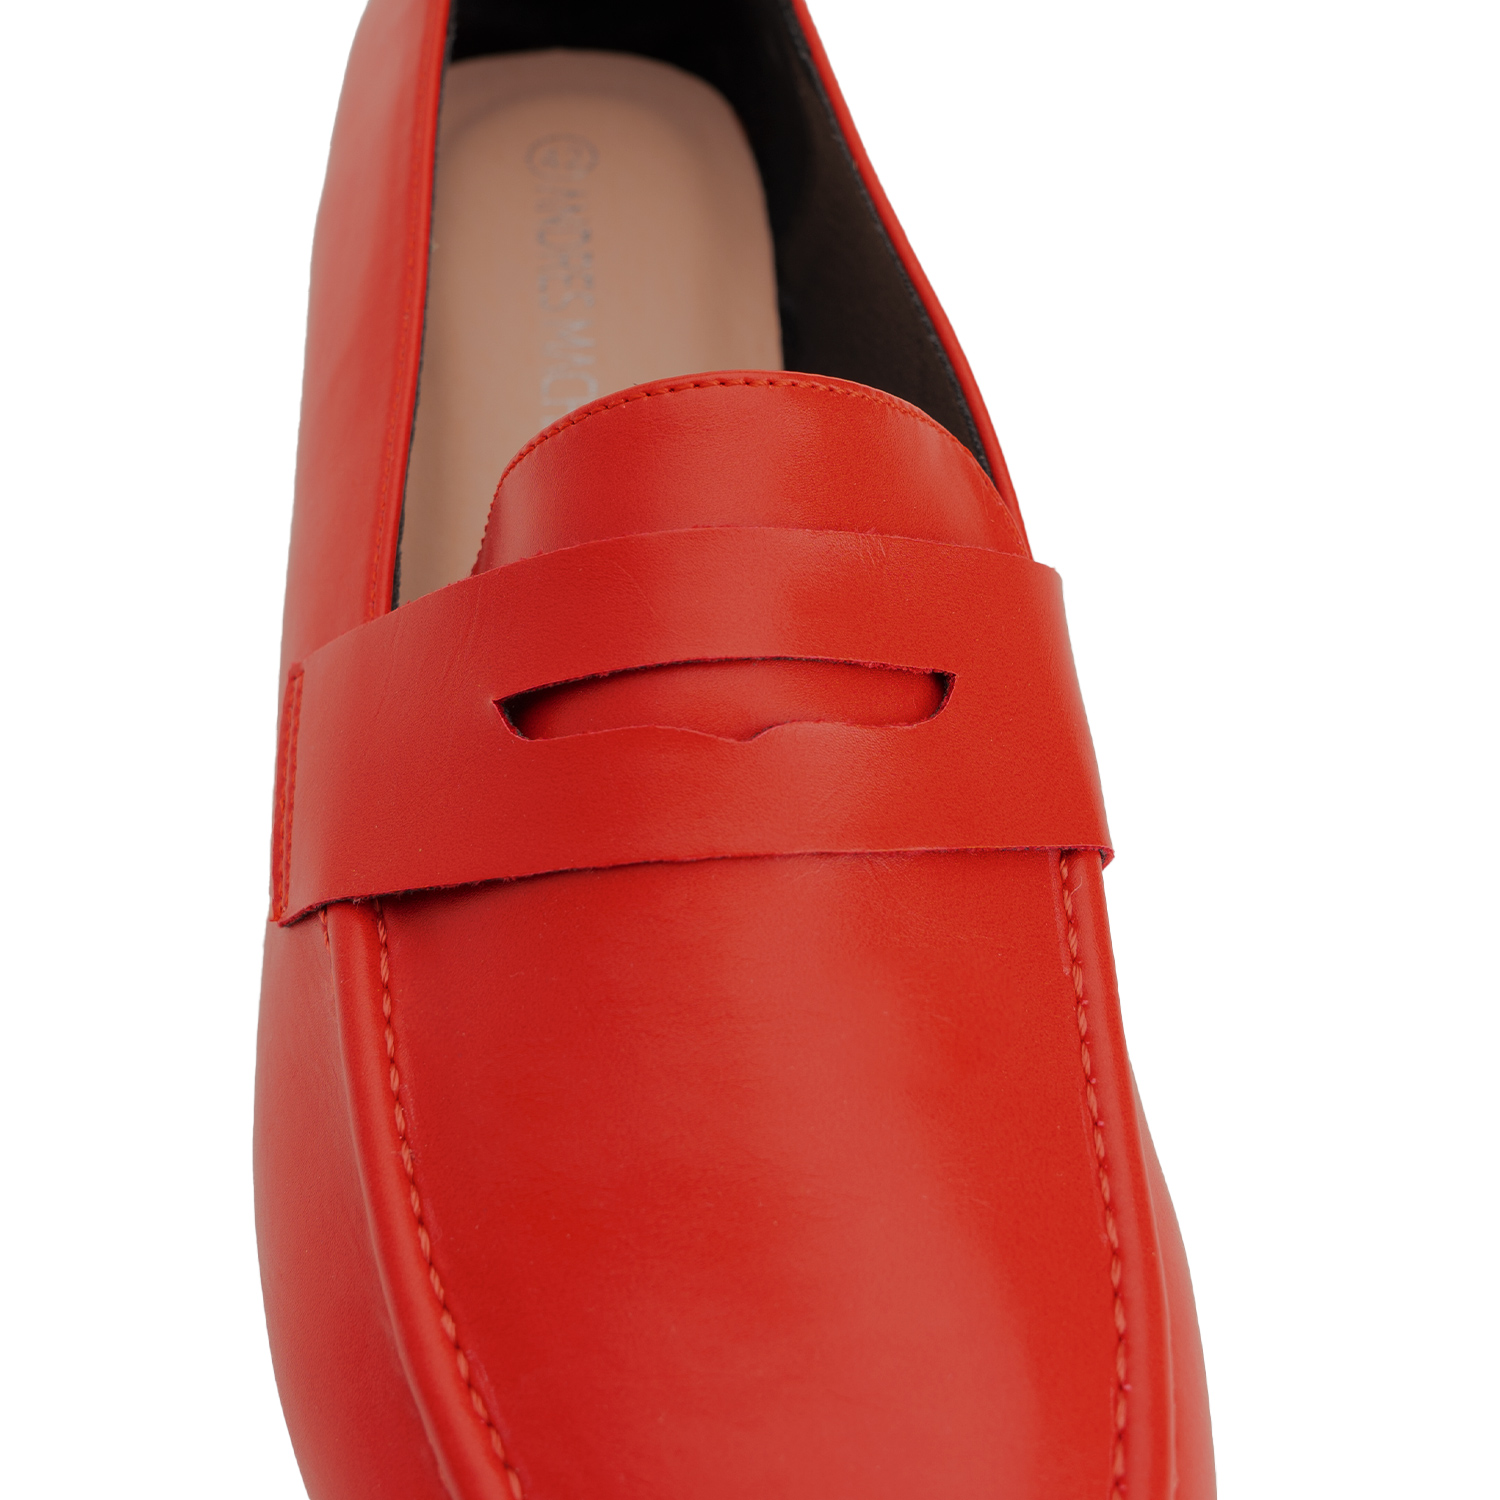 Penny loafer in red faux leather 